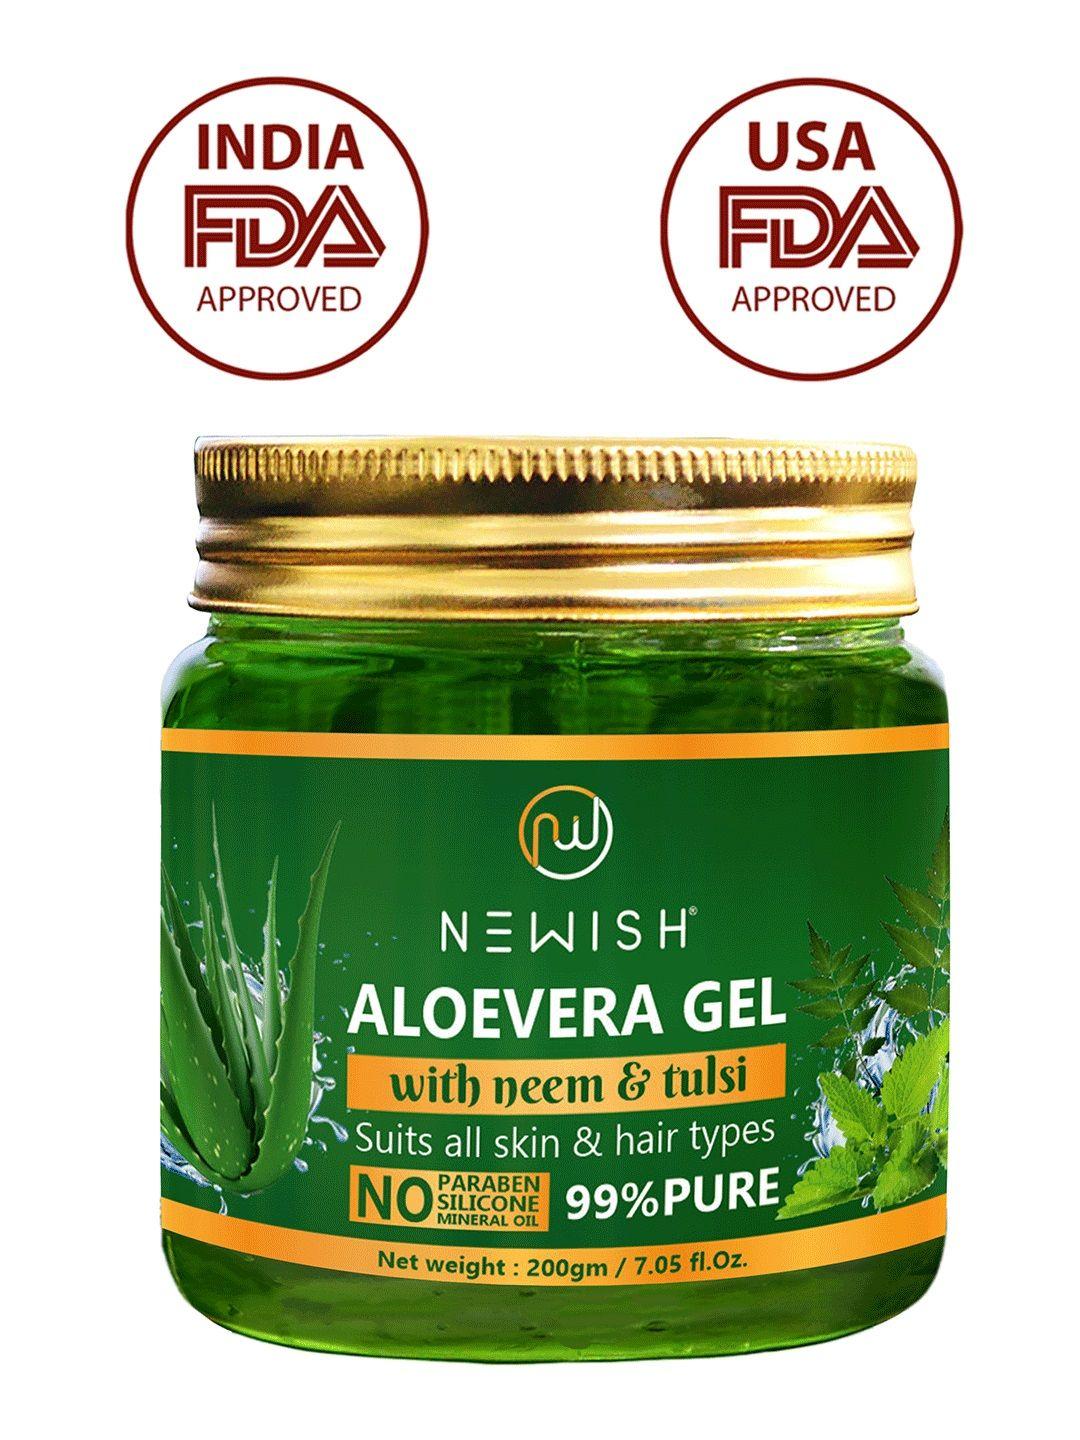 newish aloe vera gel with neem & tulsi extracts for anti ageing uneven skin tone - 200 g